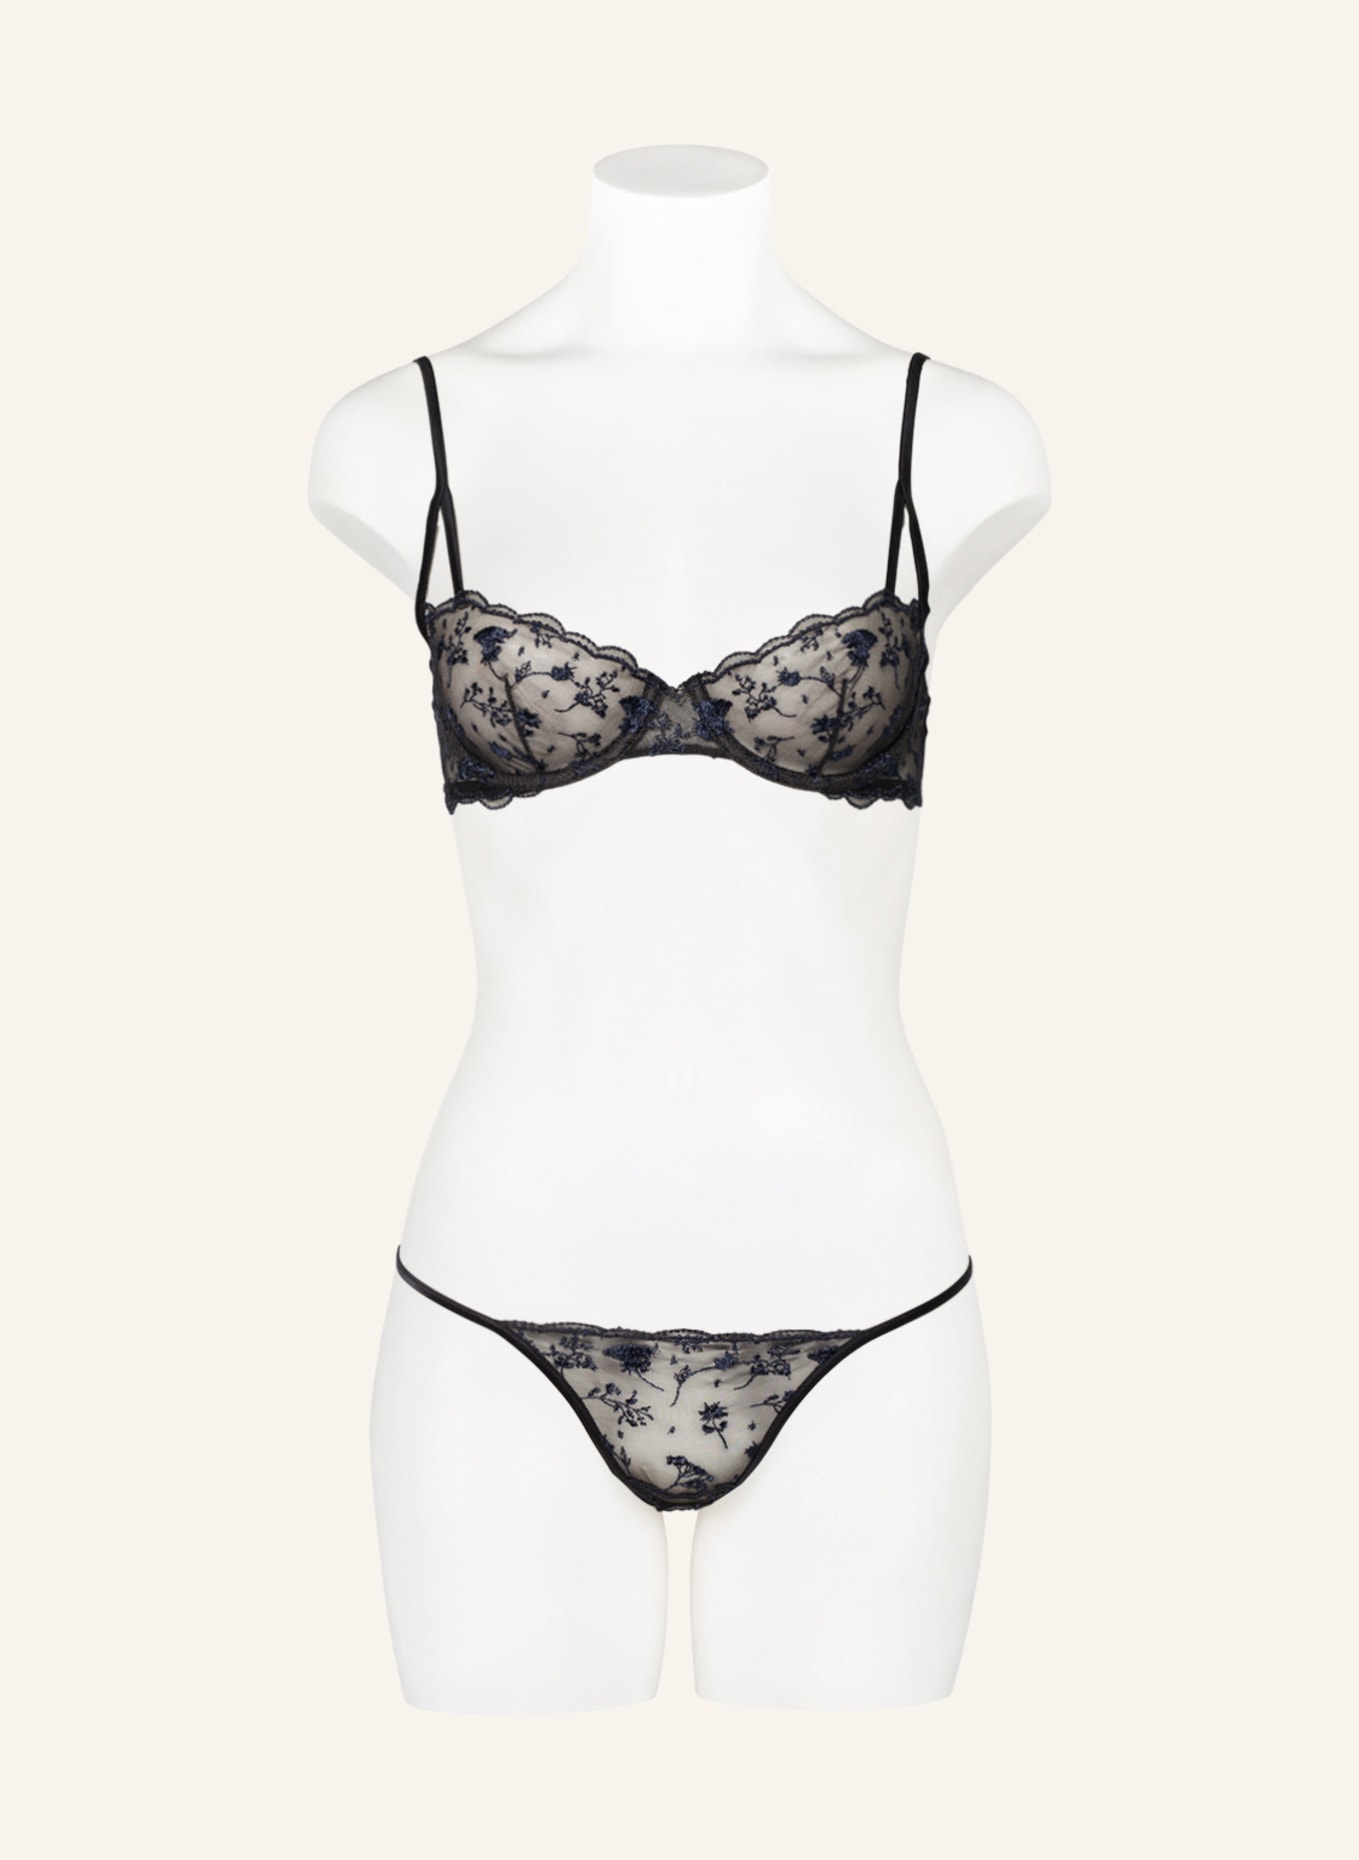 La Perla - Introducing our new Showtime balconette bra, designed to enhance  curves, subtly lift and create a strong, seductive silhouette. Inspired by  everyday romance and the freedom to move in fabrics